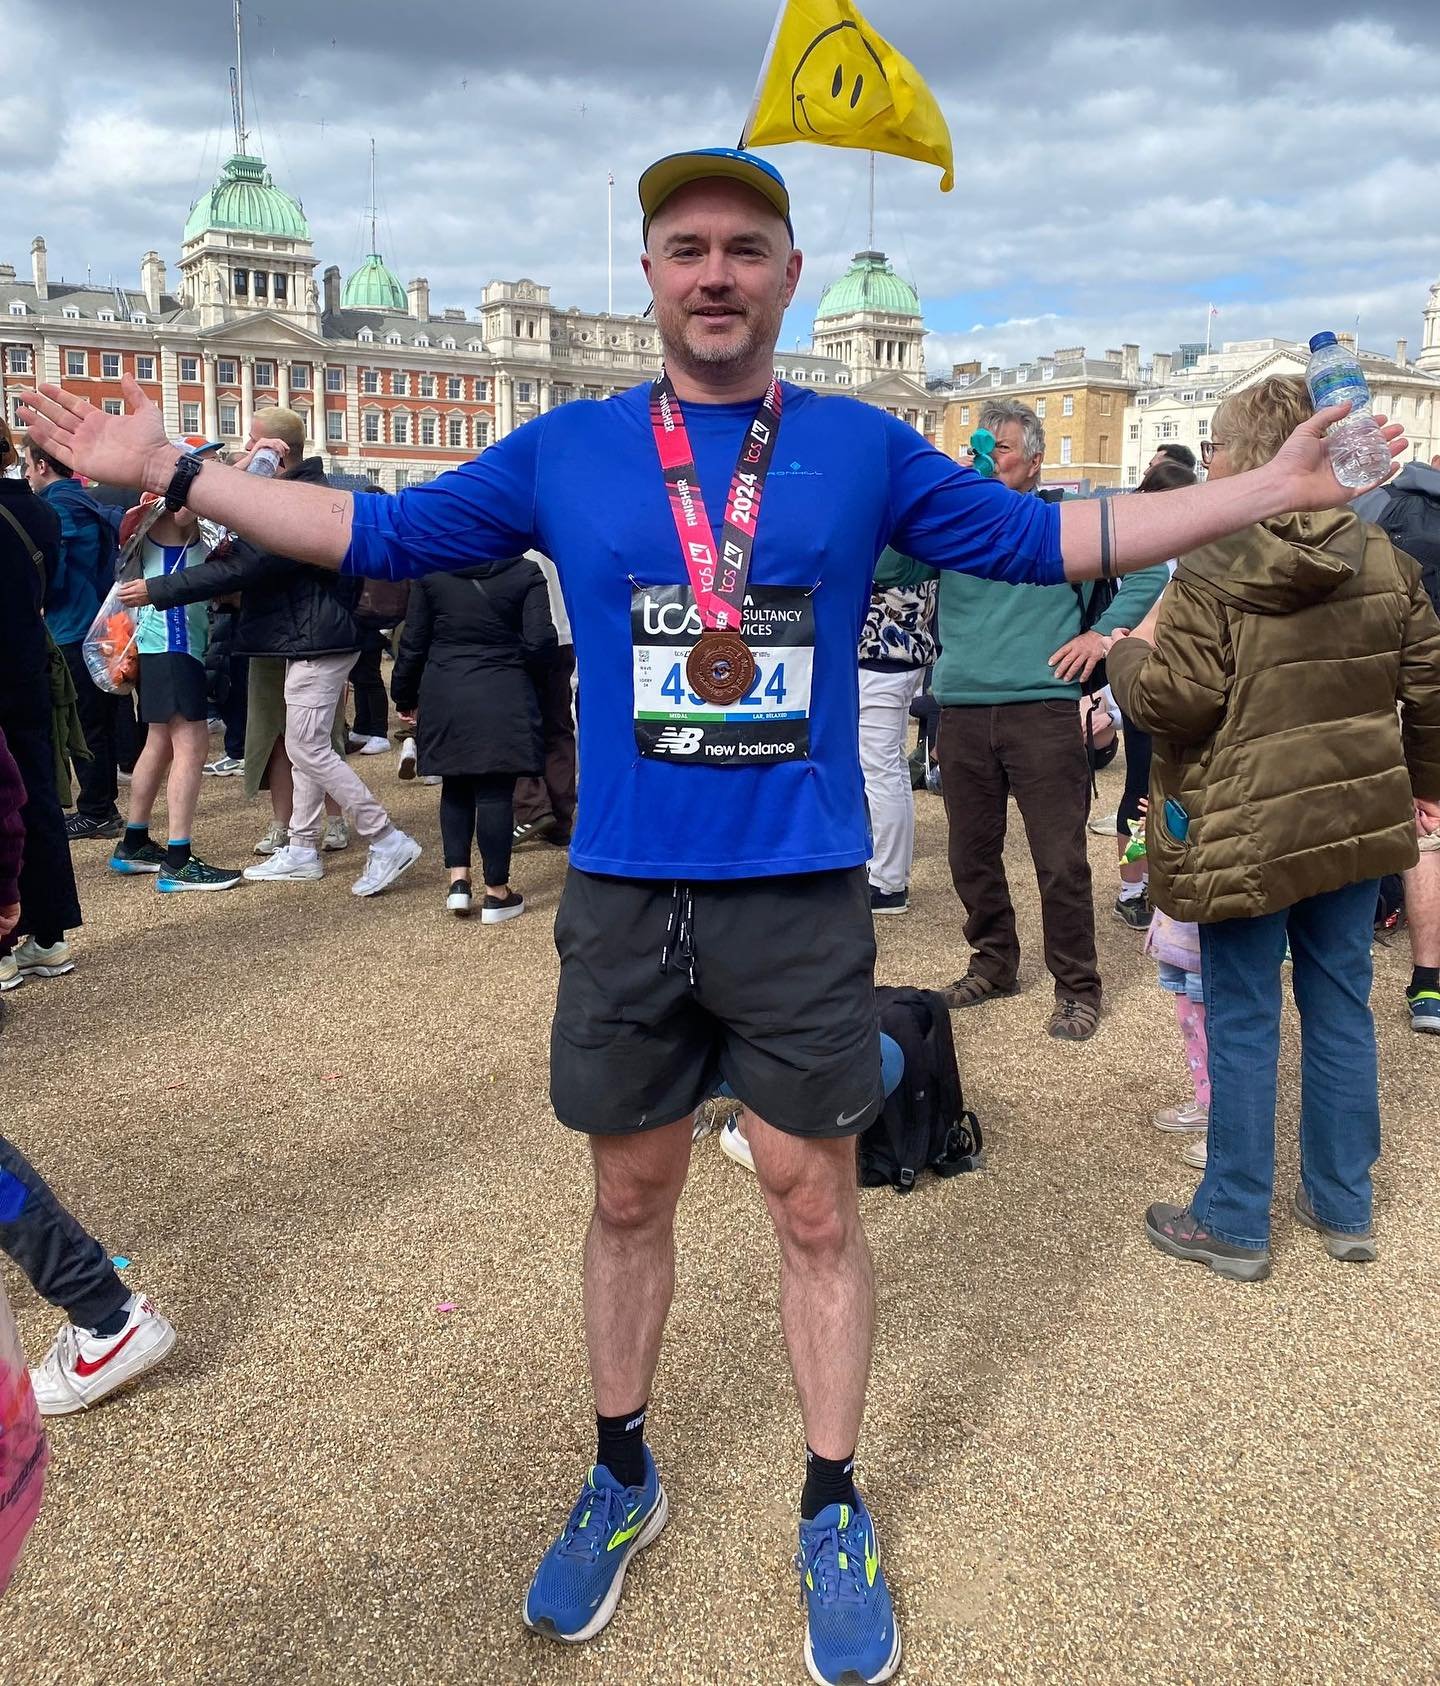 London legends! 🏃🏻&zwj;♂️ 🏃🏻 🏅 

Antony and Richard took on the London Marathon at the weekend; its iconic status with a massive field and thousands of supporters lining the course meant it was an amazing experience for them!

Both had tricky bu